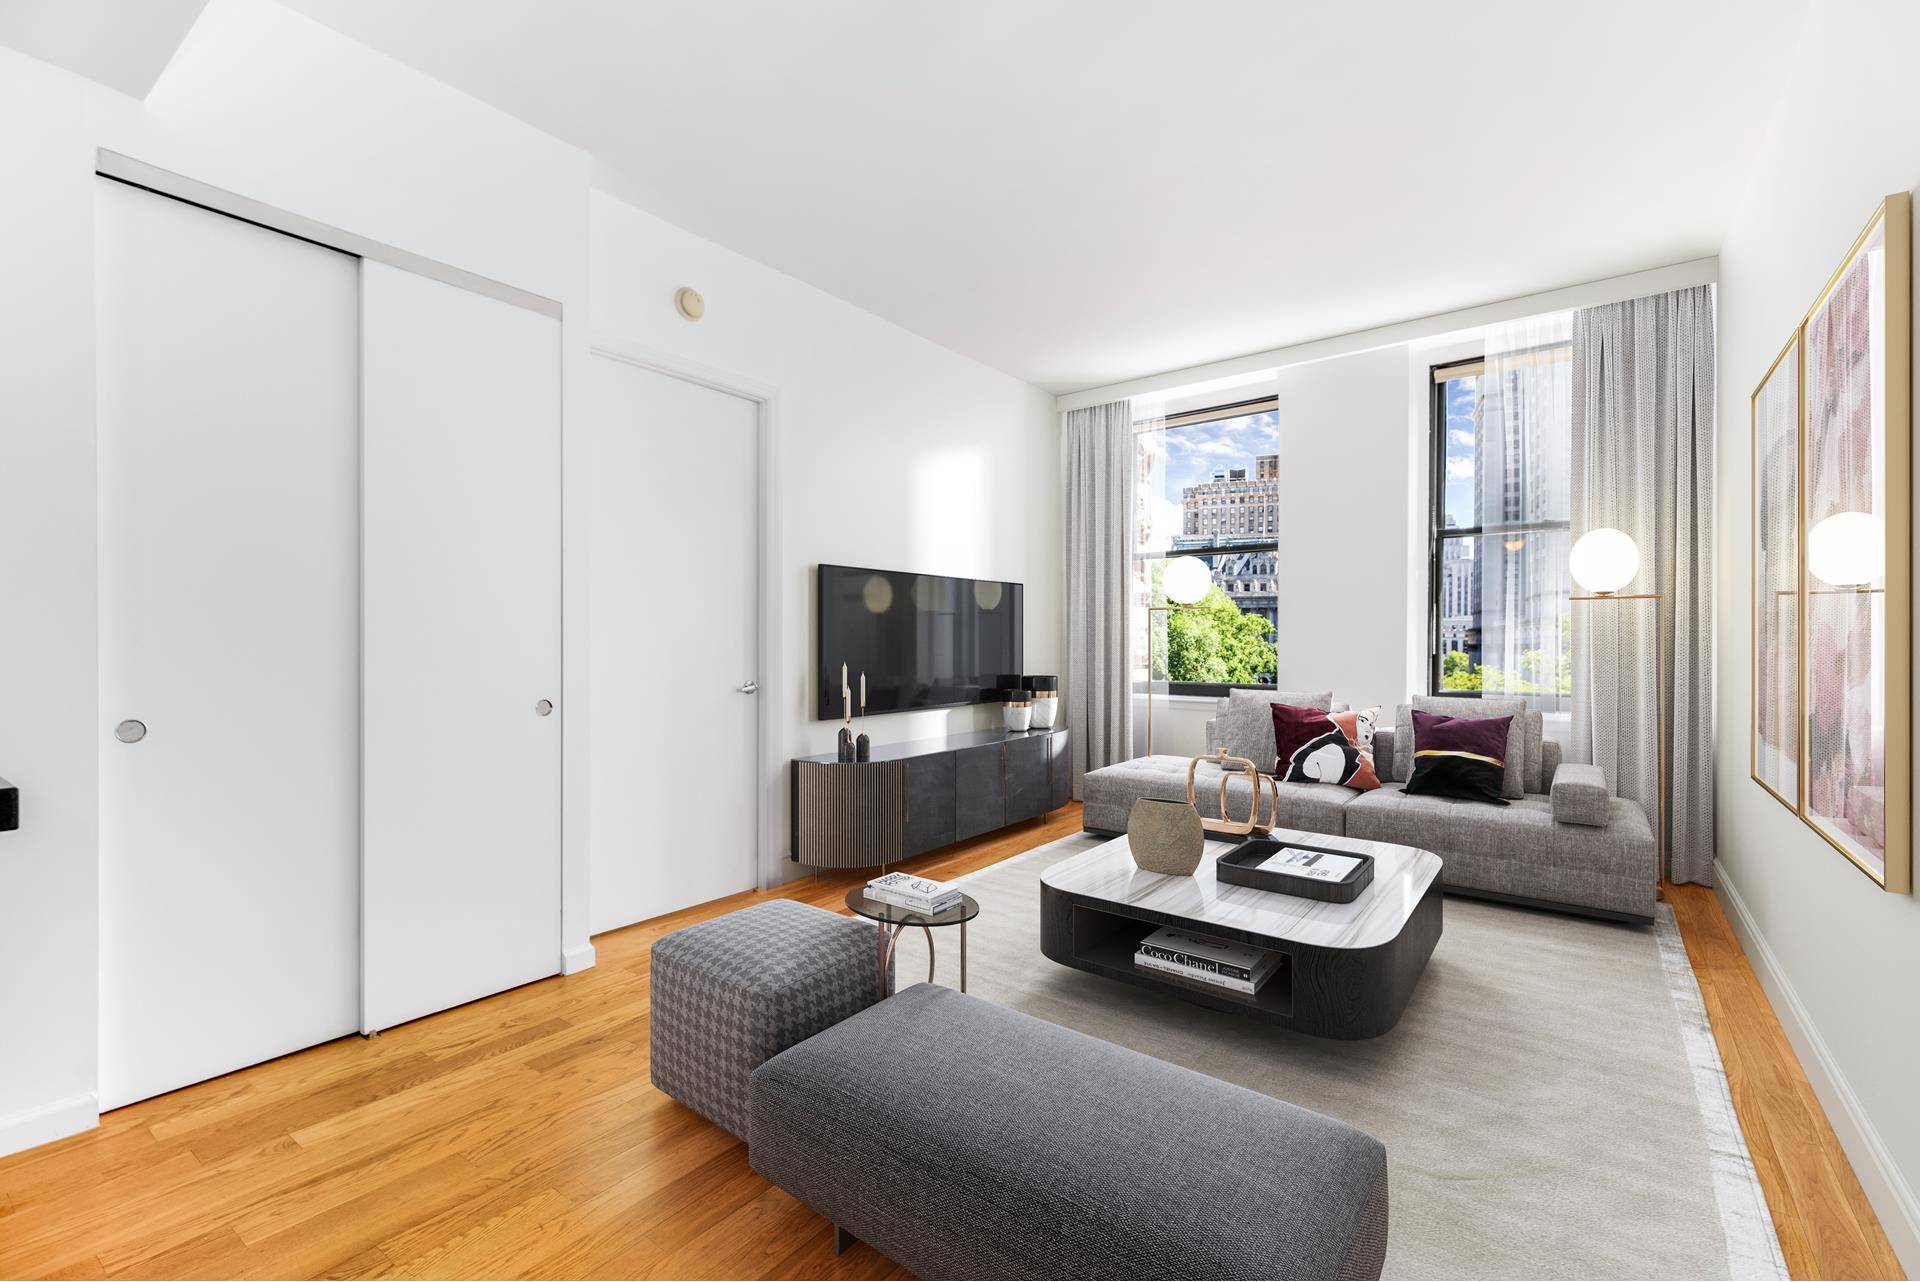 This bright and spacious, sun filled apartment has views of City Hall Park from its large, north facing windows.